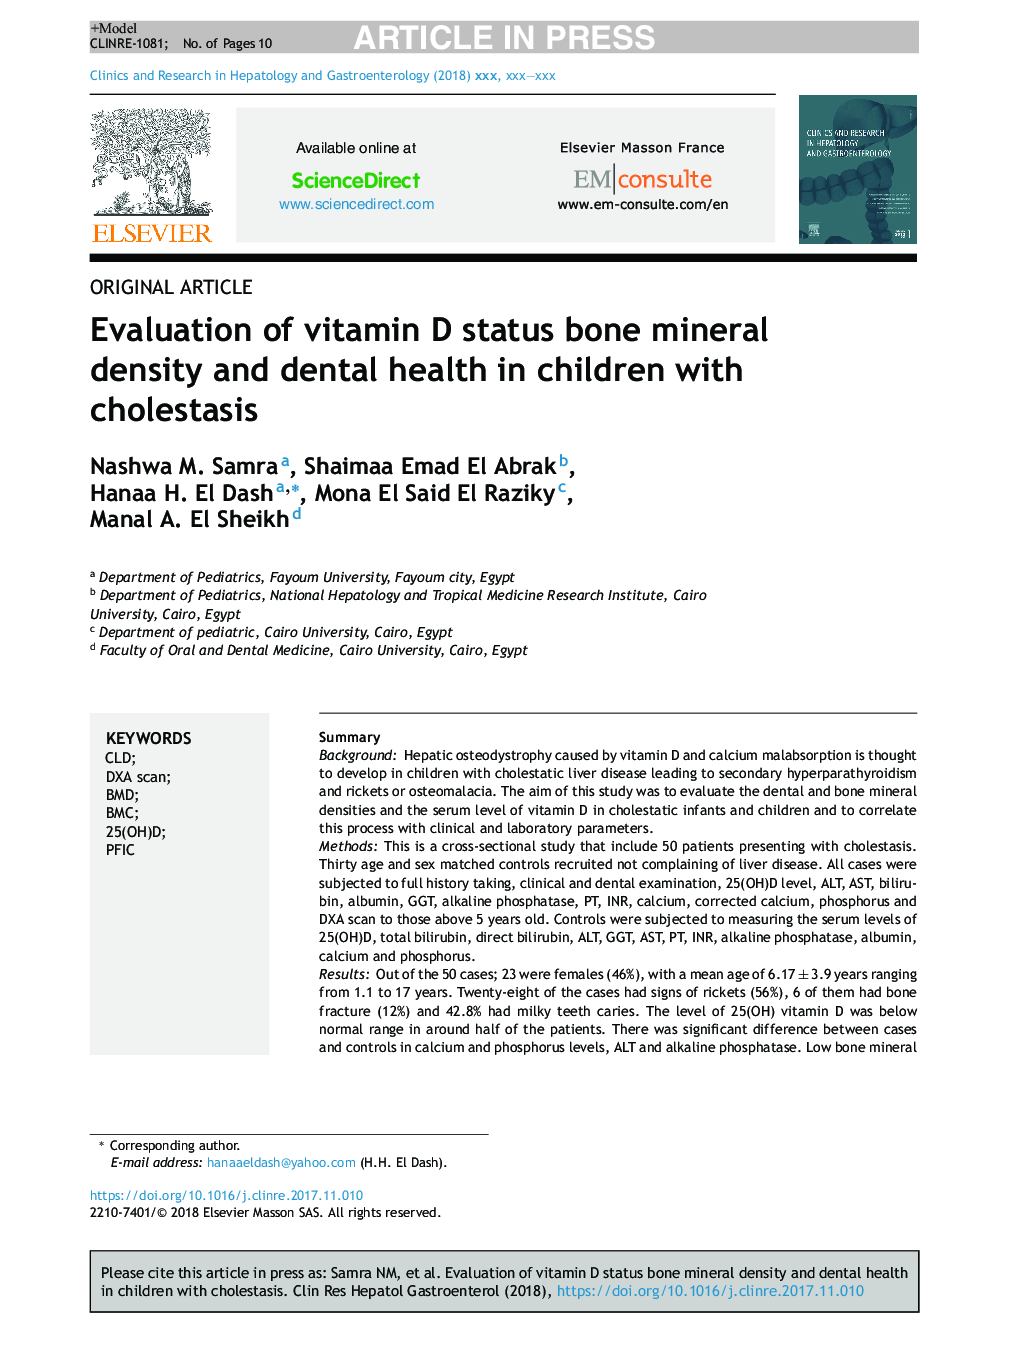 Evaluation of vitamin D status bone mineral density and dental health in children with cholestasis